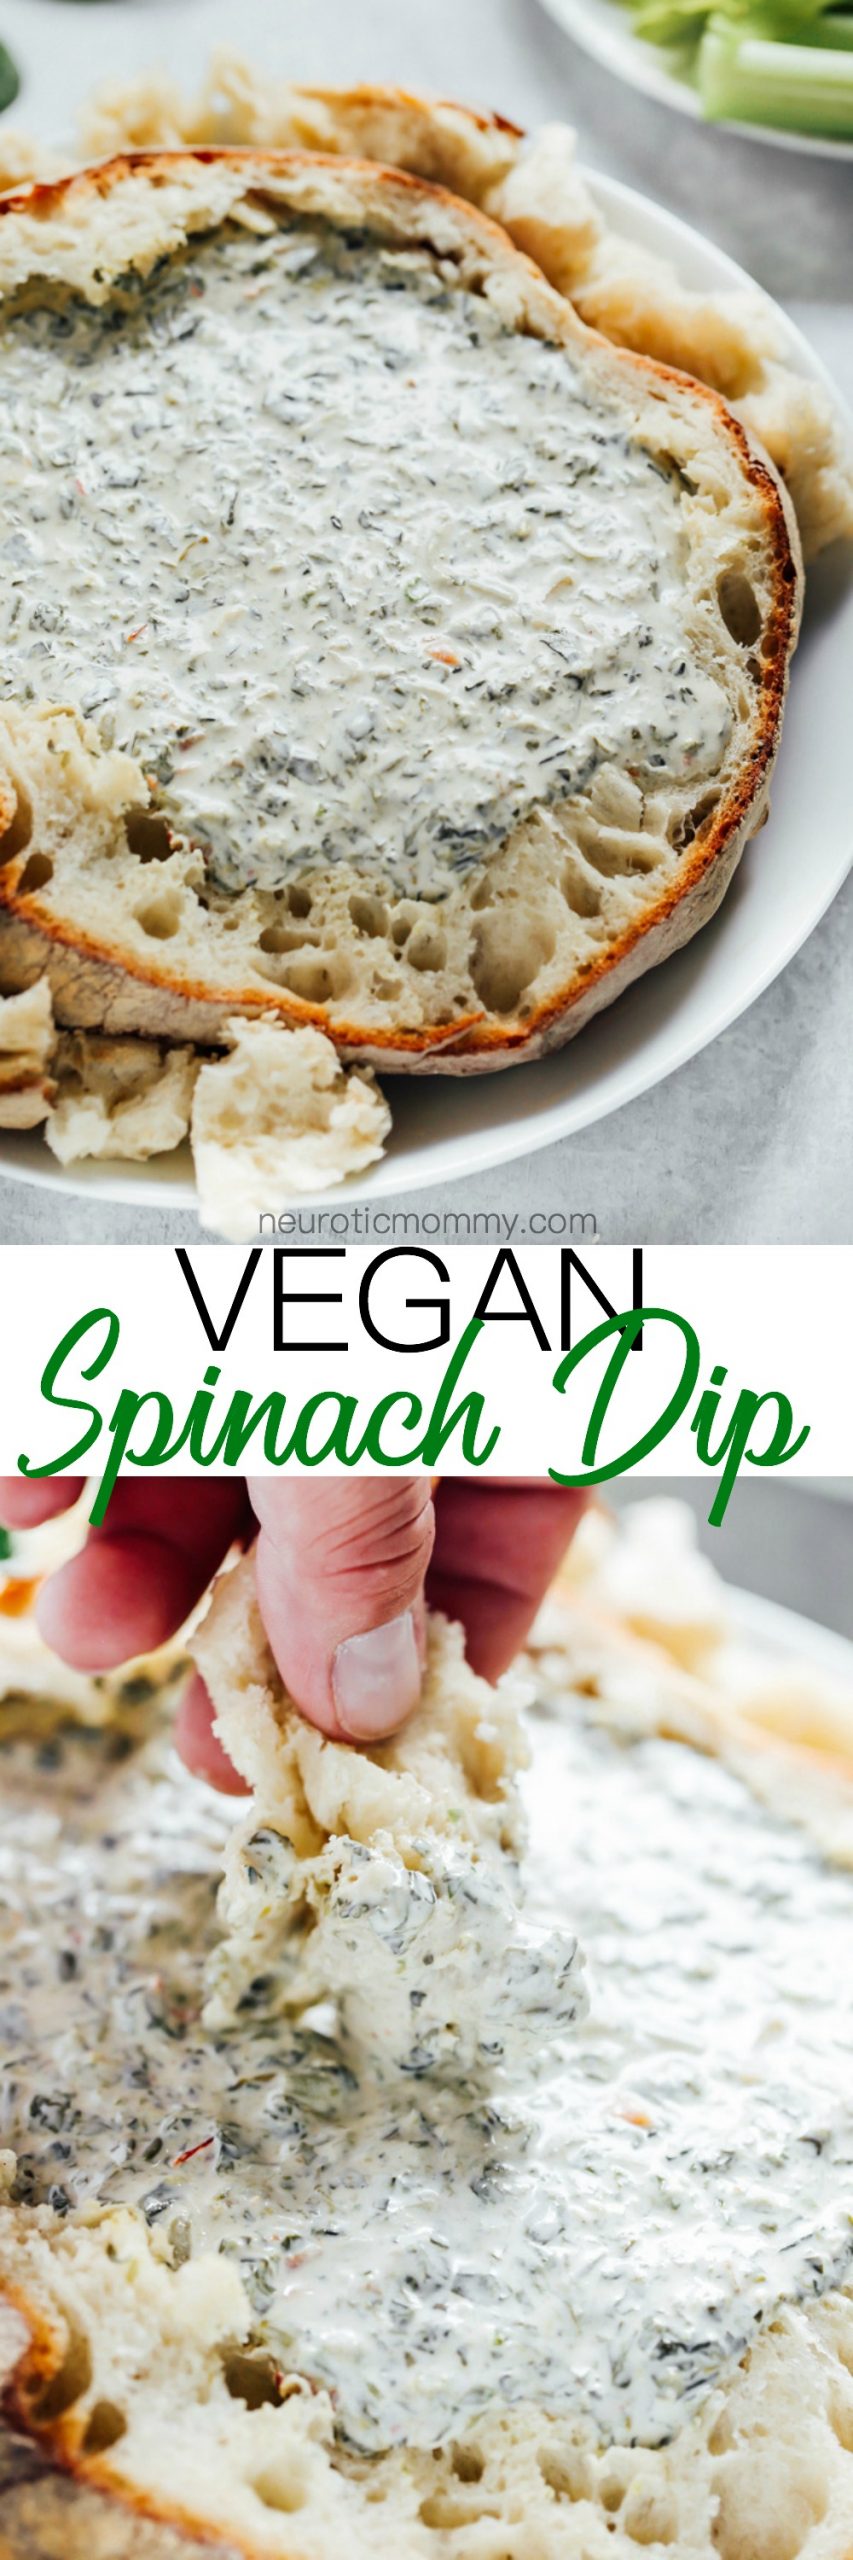 A creamy irresistable party perfect spinach dip that will always win the hearts of your family and friends. NeuroticMommy.com #vegan #Christmas #spinachdip